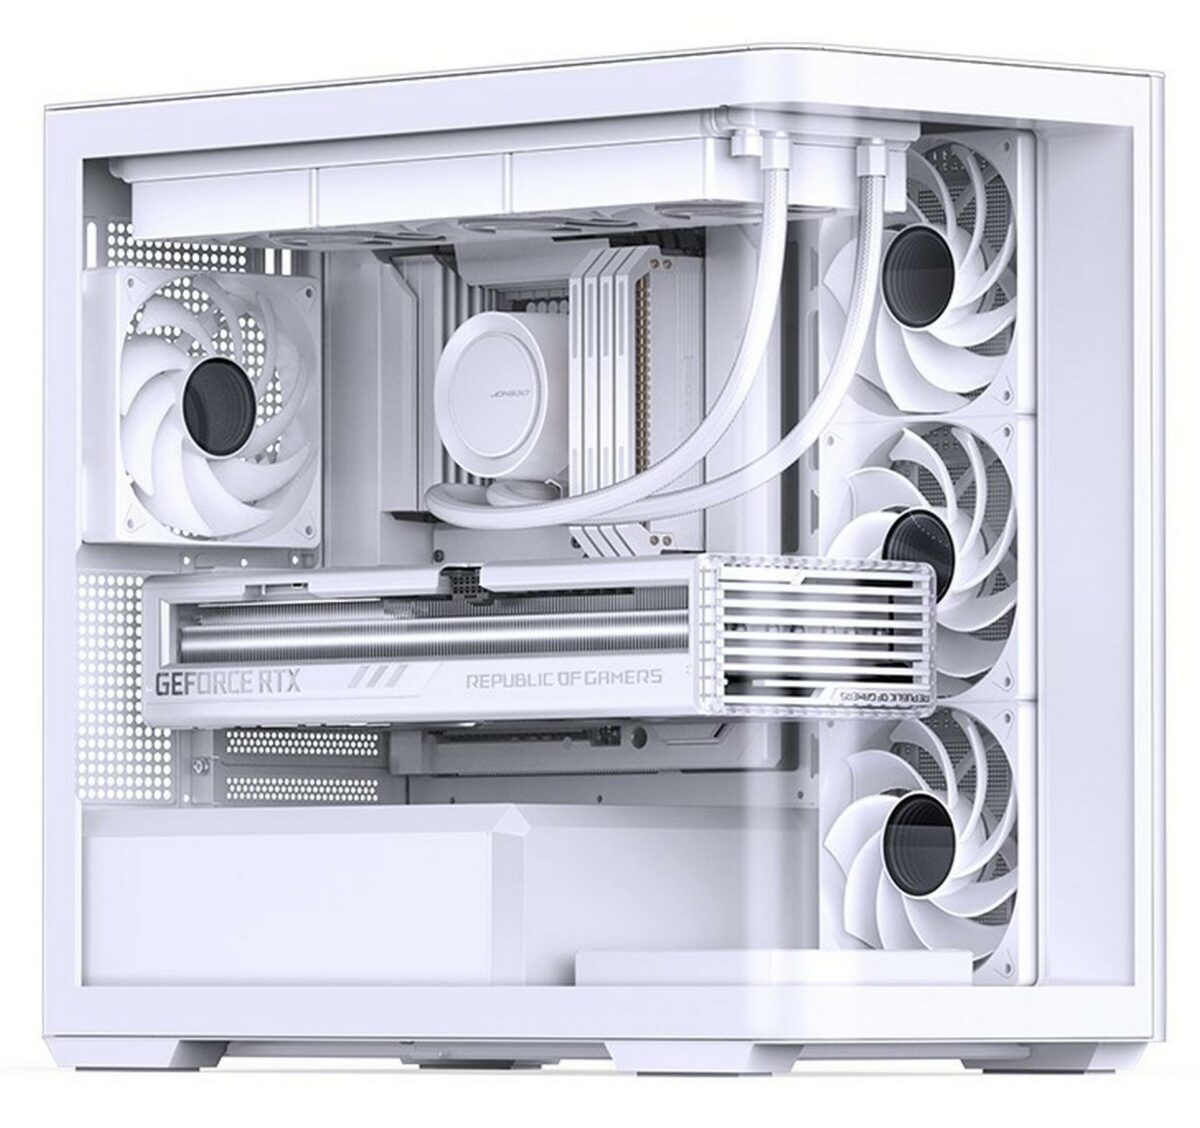 White Jonsbo D300 PC chassis right side view with RGB off.